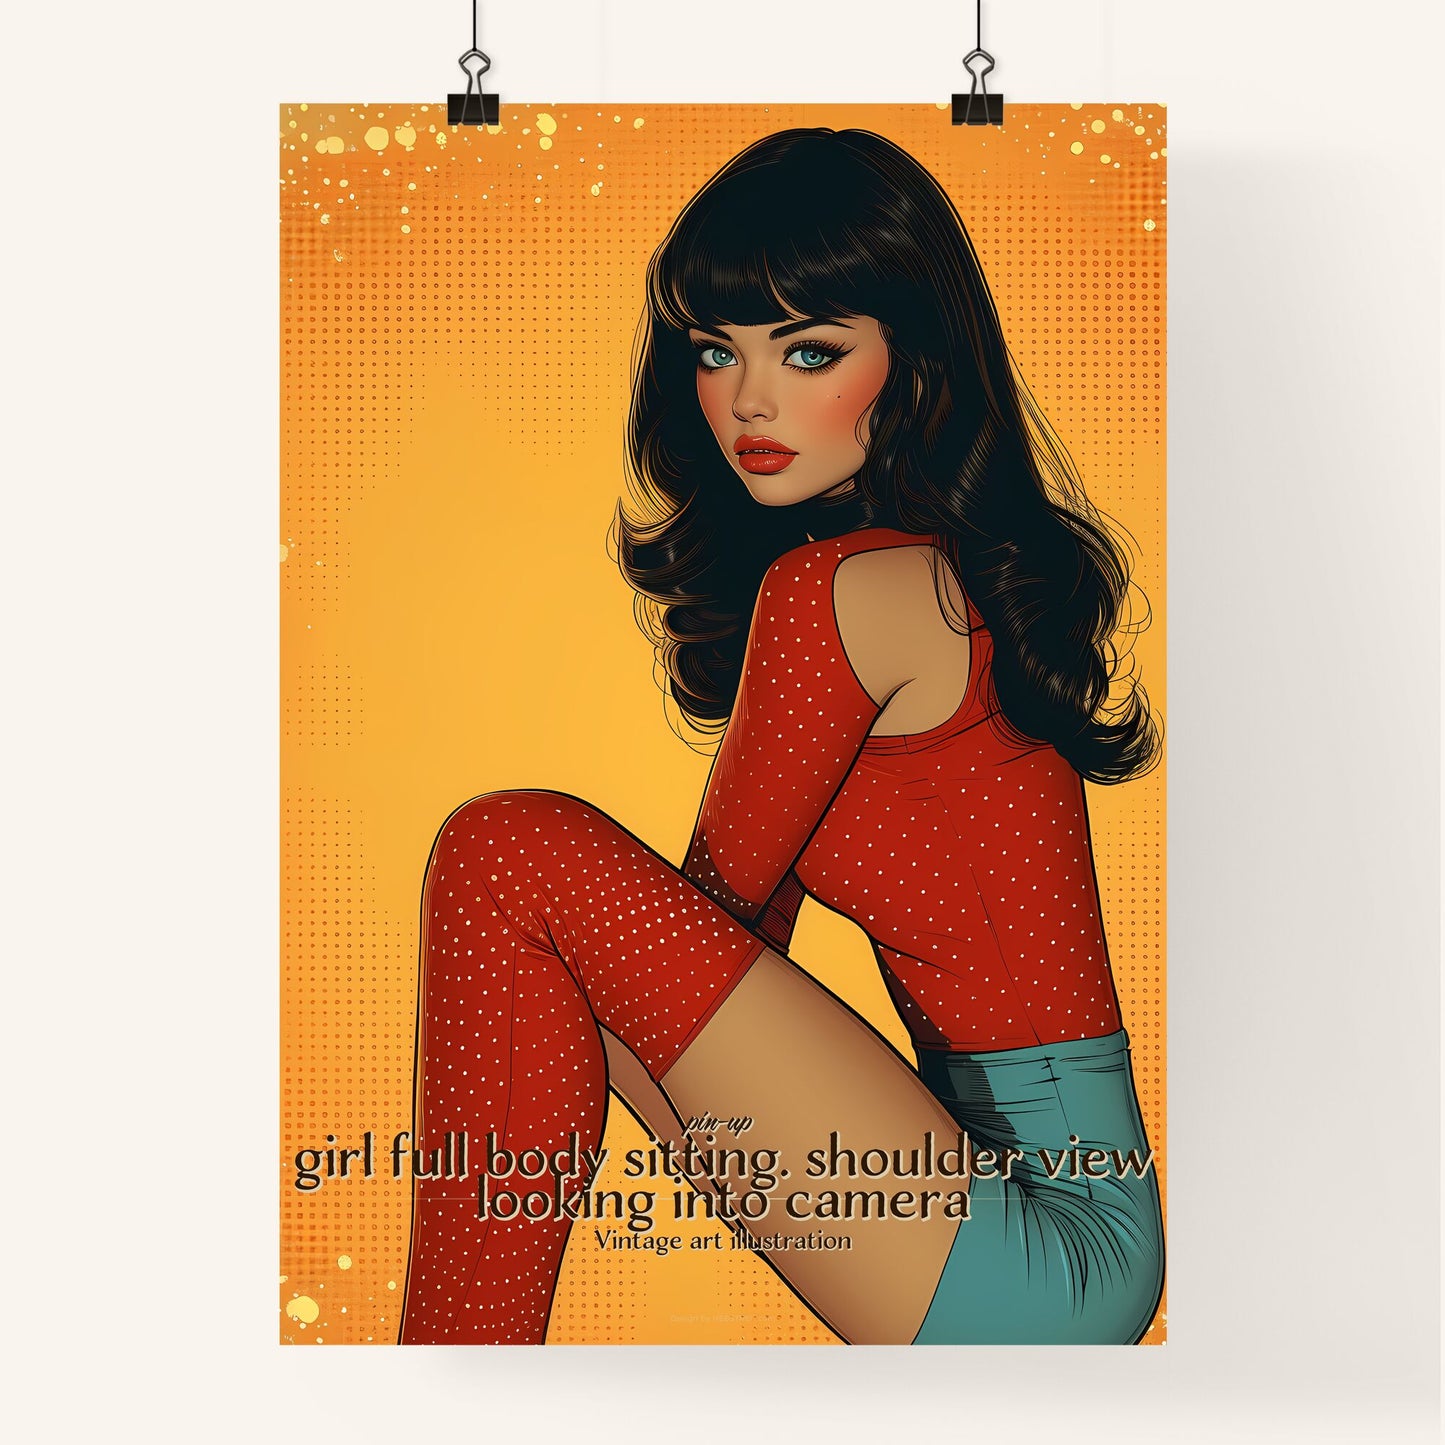 pin-up, girl full body sitting, Vintage art illustration, A Poster of a woman in a red shirt Default Title